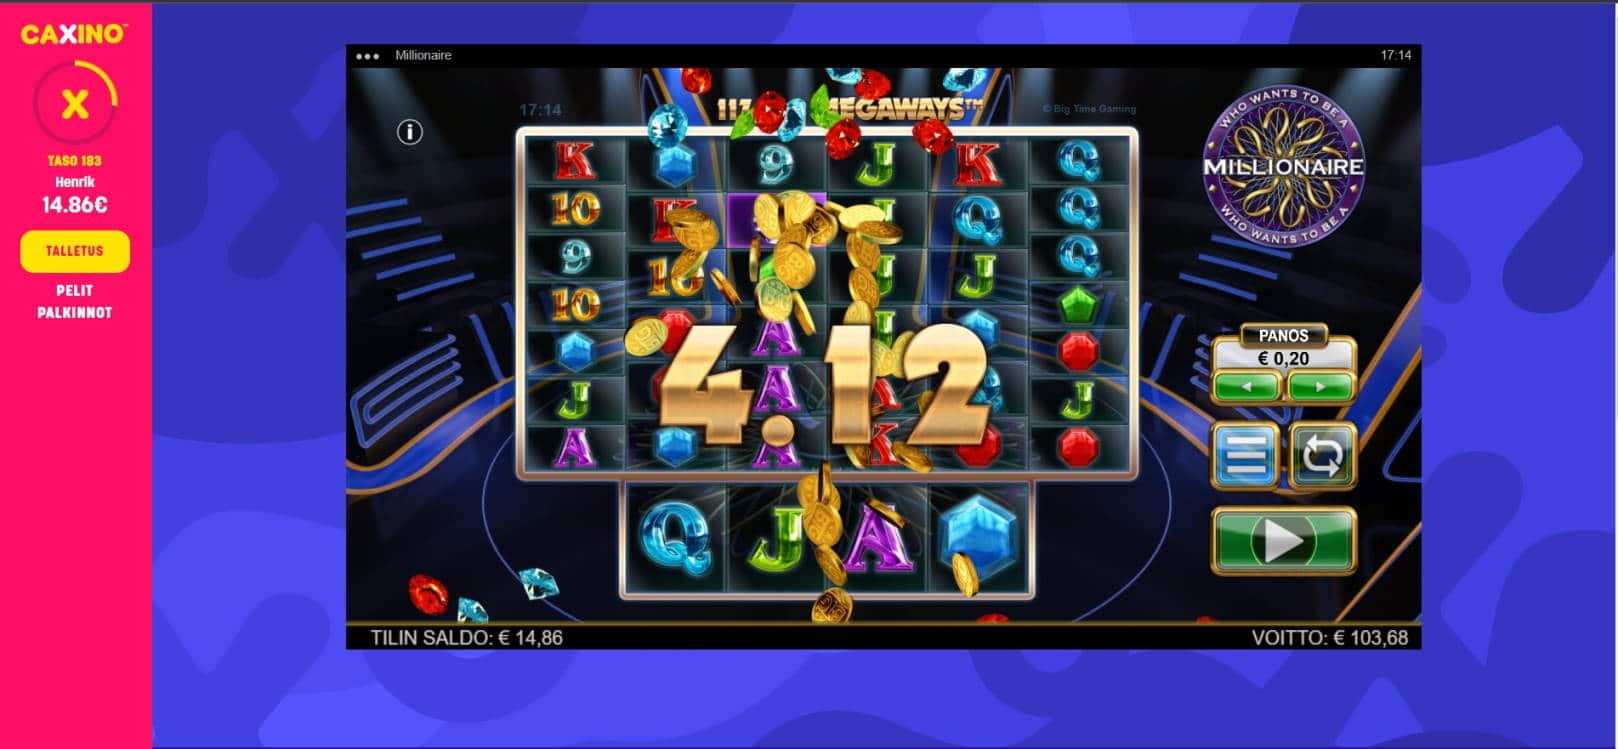 Who Wants to be a Millionaire Casino win picture by Henkka 15.12.2021 103.68e 518X Caxino